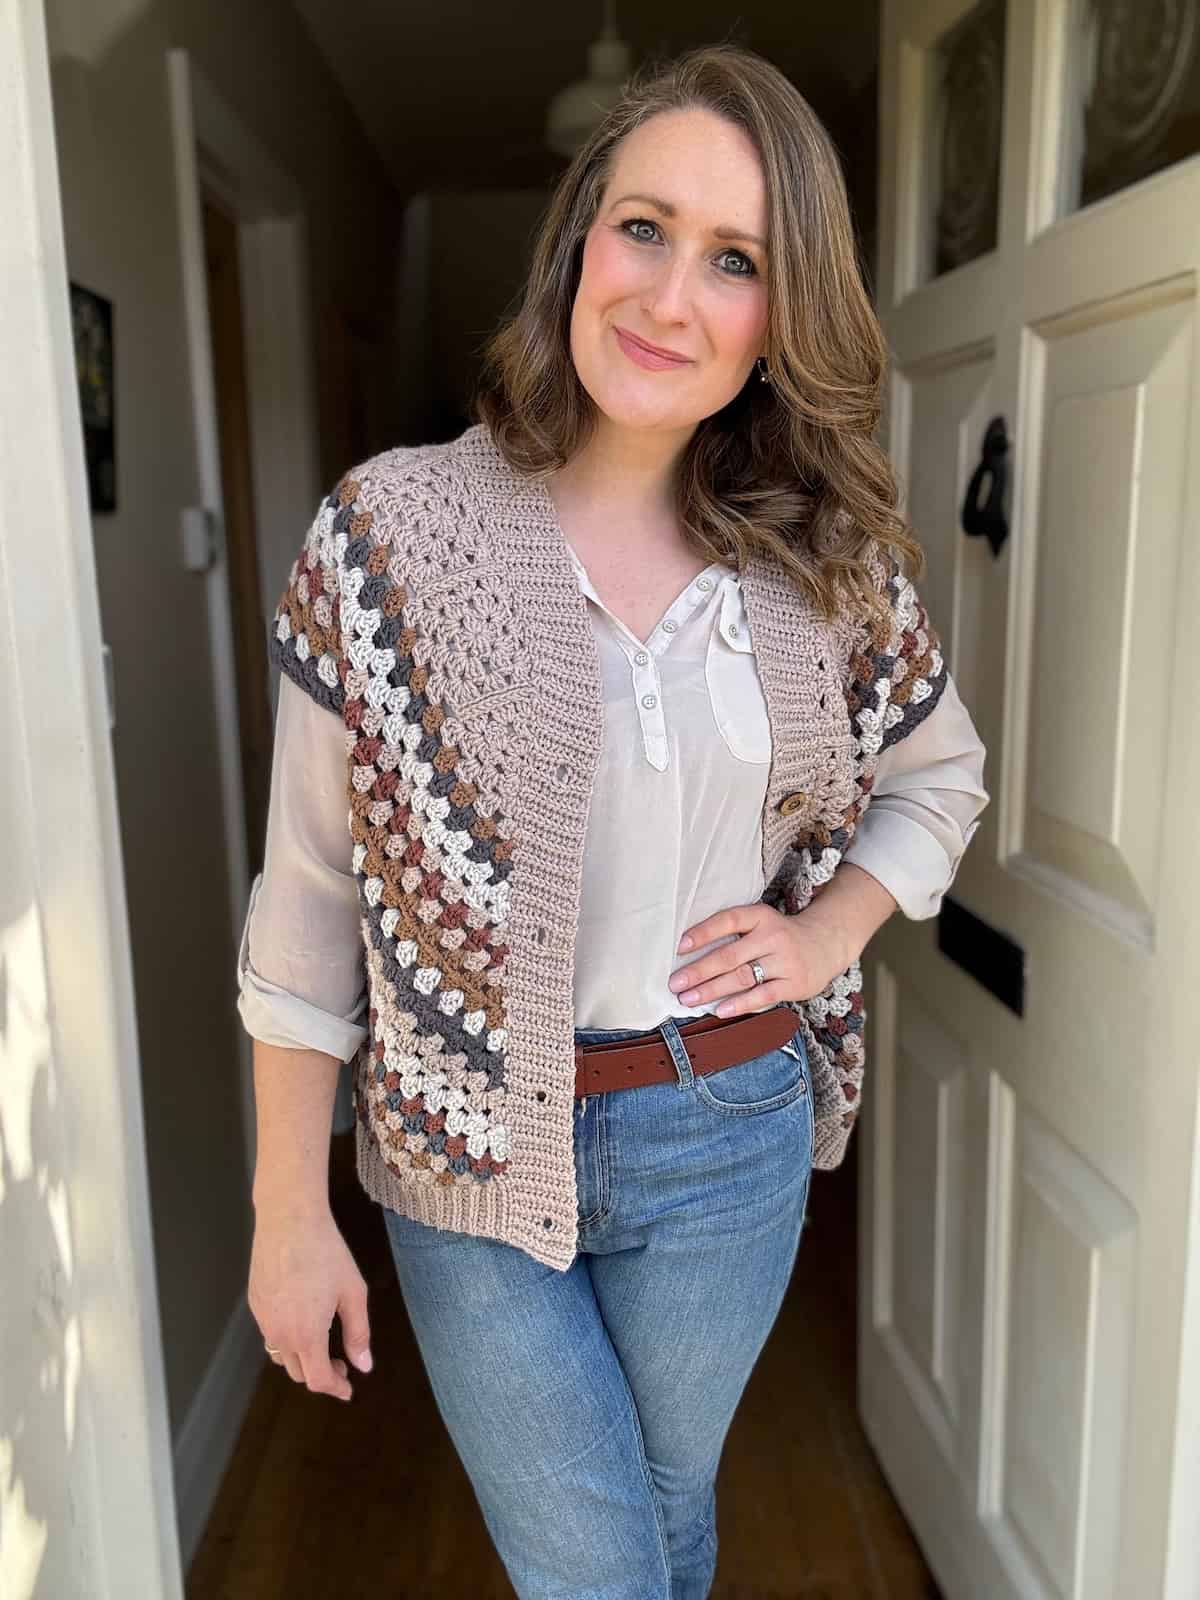 A woman smiling at the camera, standing indoors wearing a granny square crochet jacket over a casual blouse and jeans.